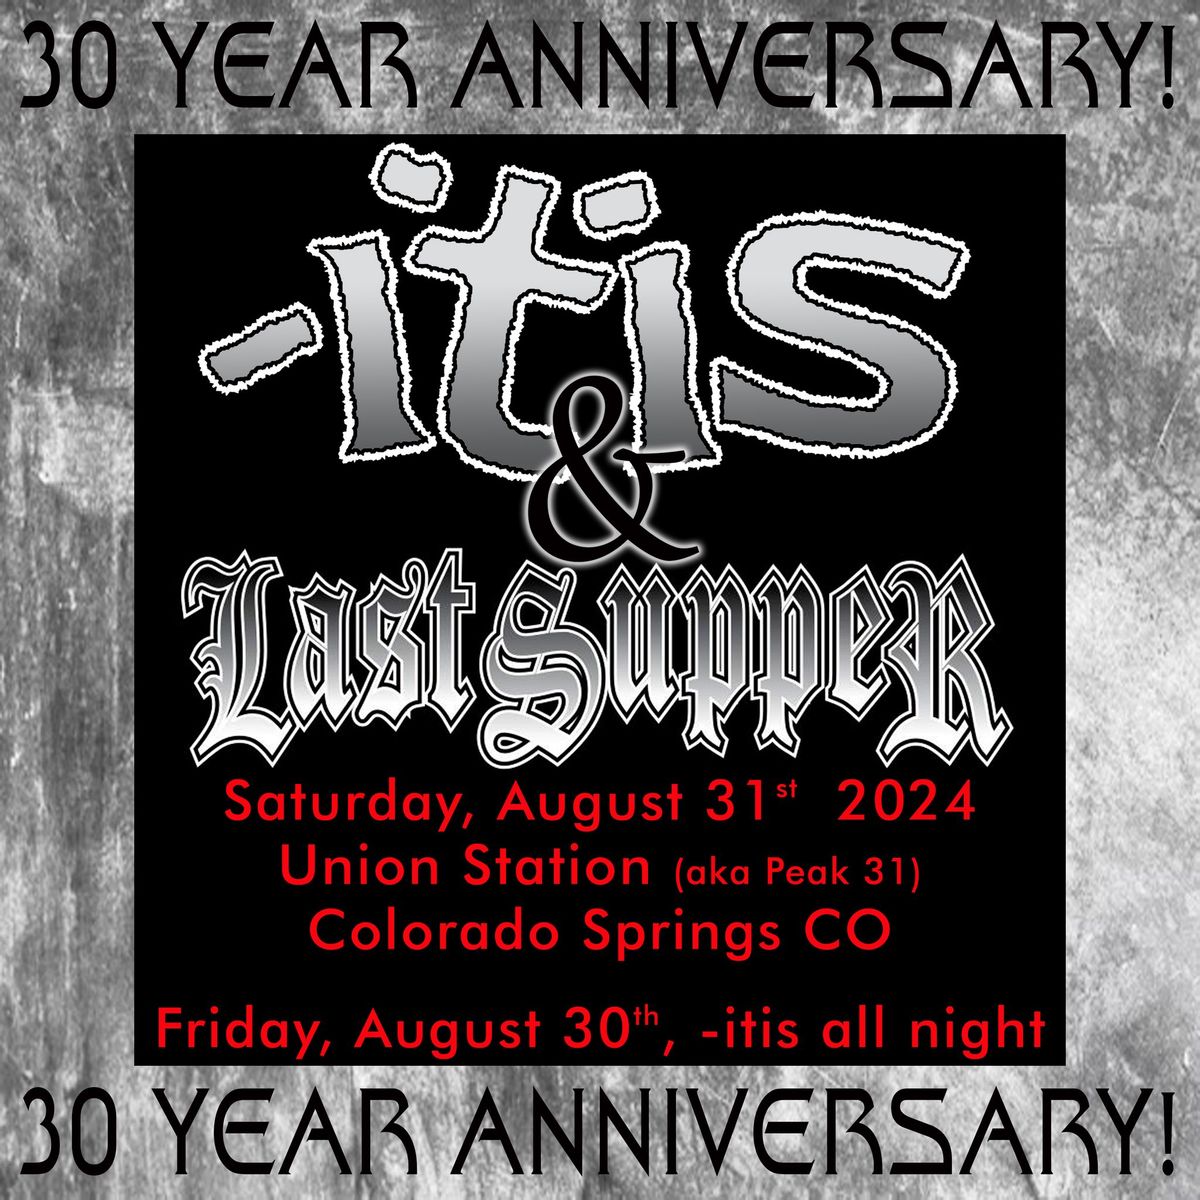 -itis & Last Supper at Union Station Saturday August 31st, 2024